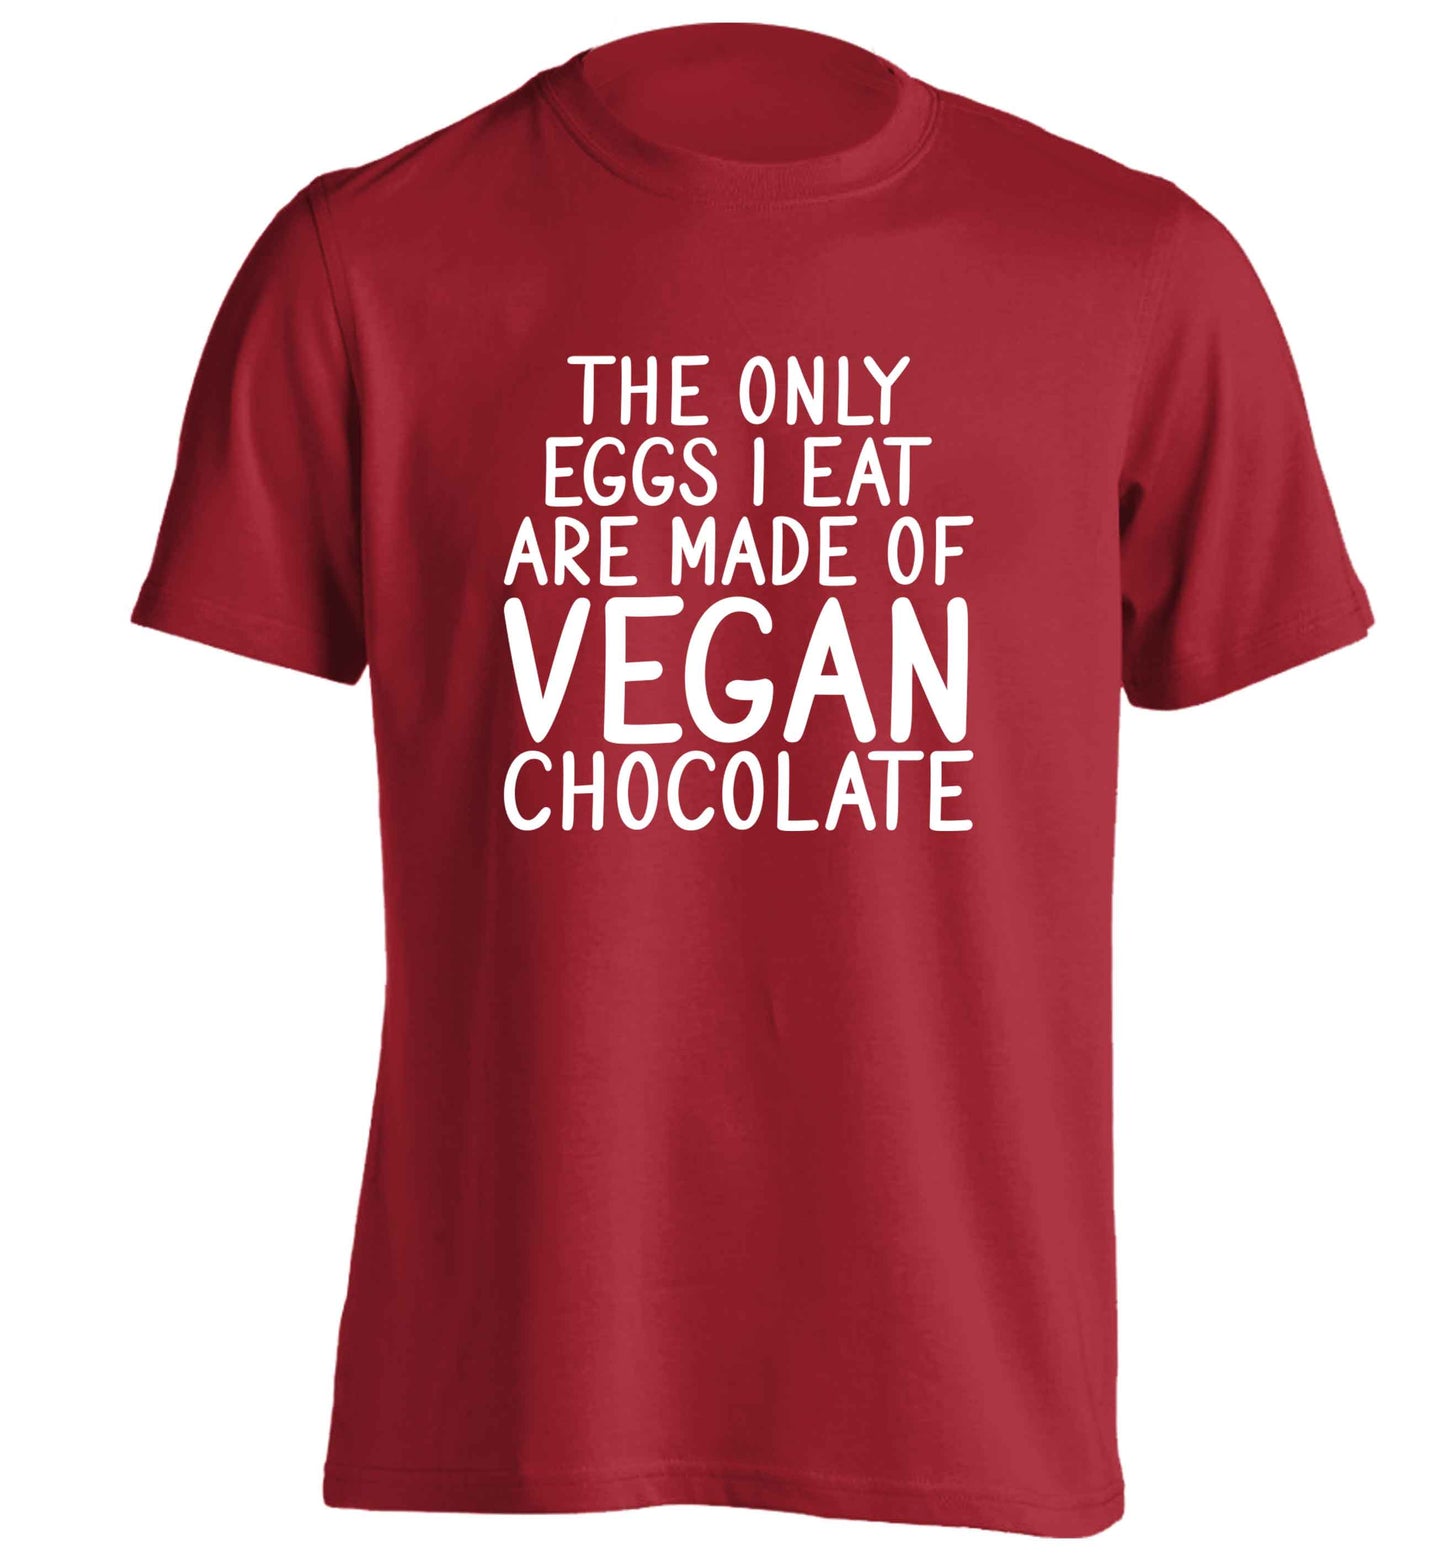 The only eggs I eat are made of vegan chocolate adults unisex red Tshirt 2XL